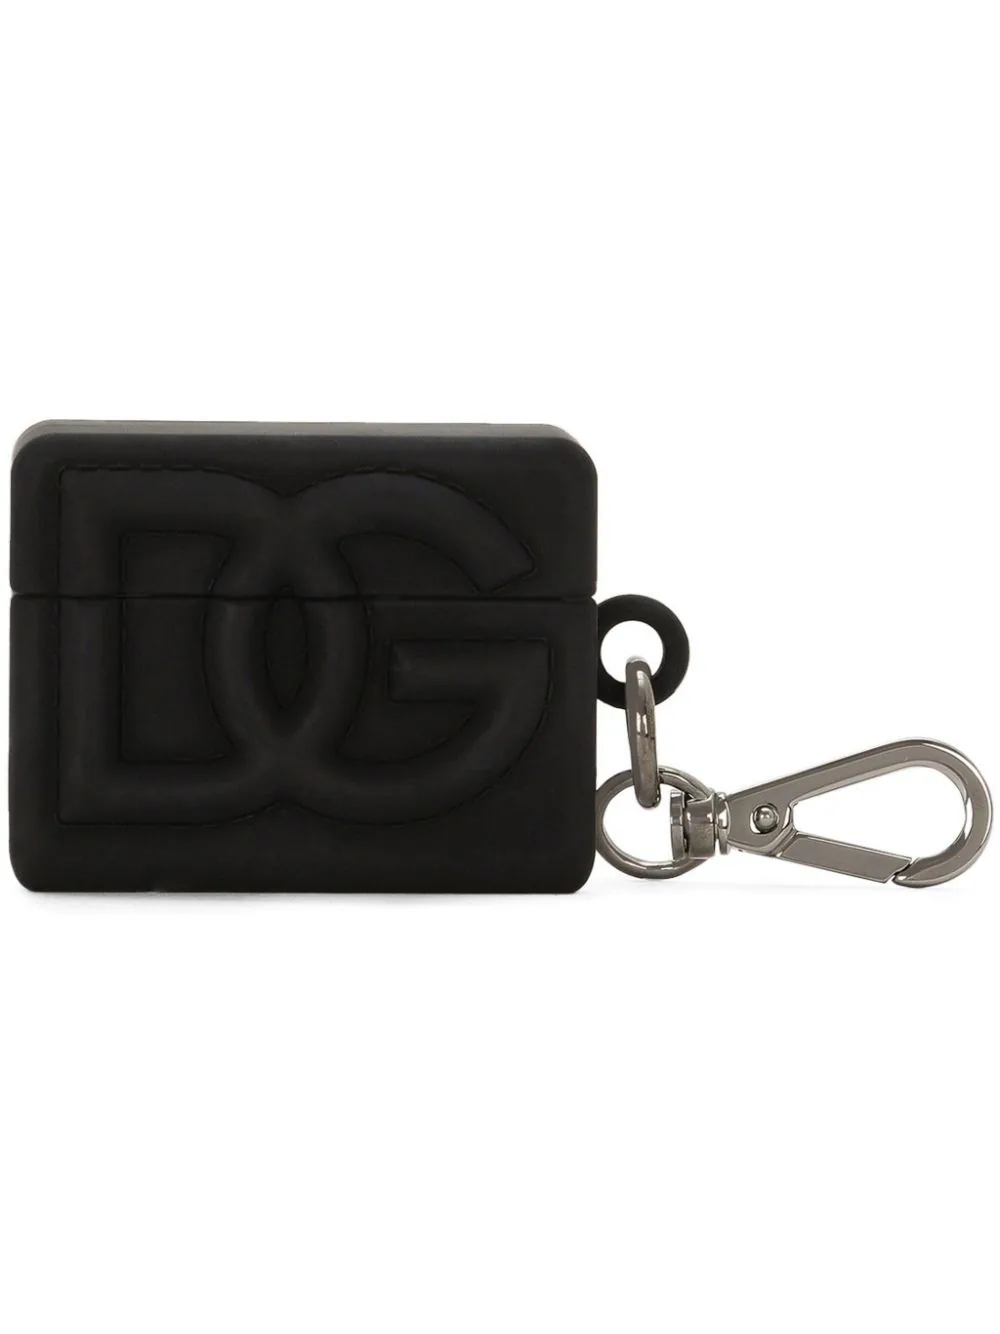 Airpods 3 Gucci Logo Leather Case - Black in Pakistan